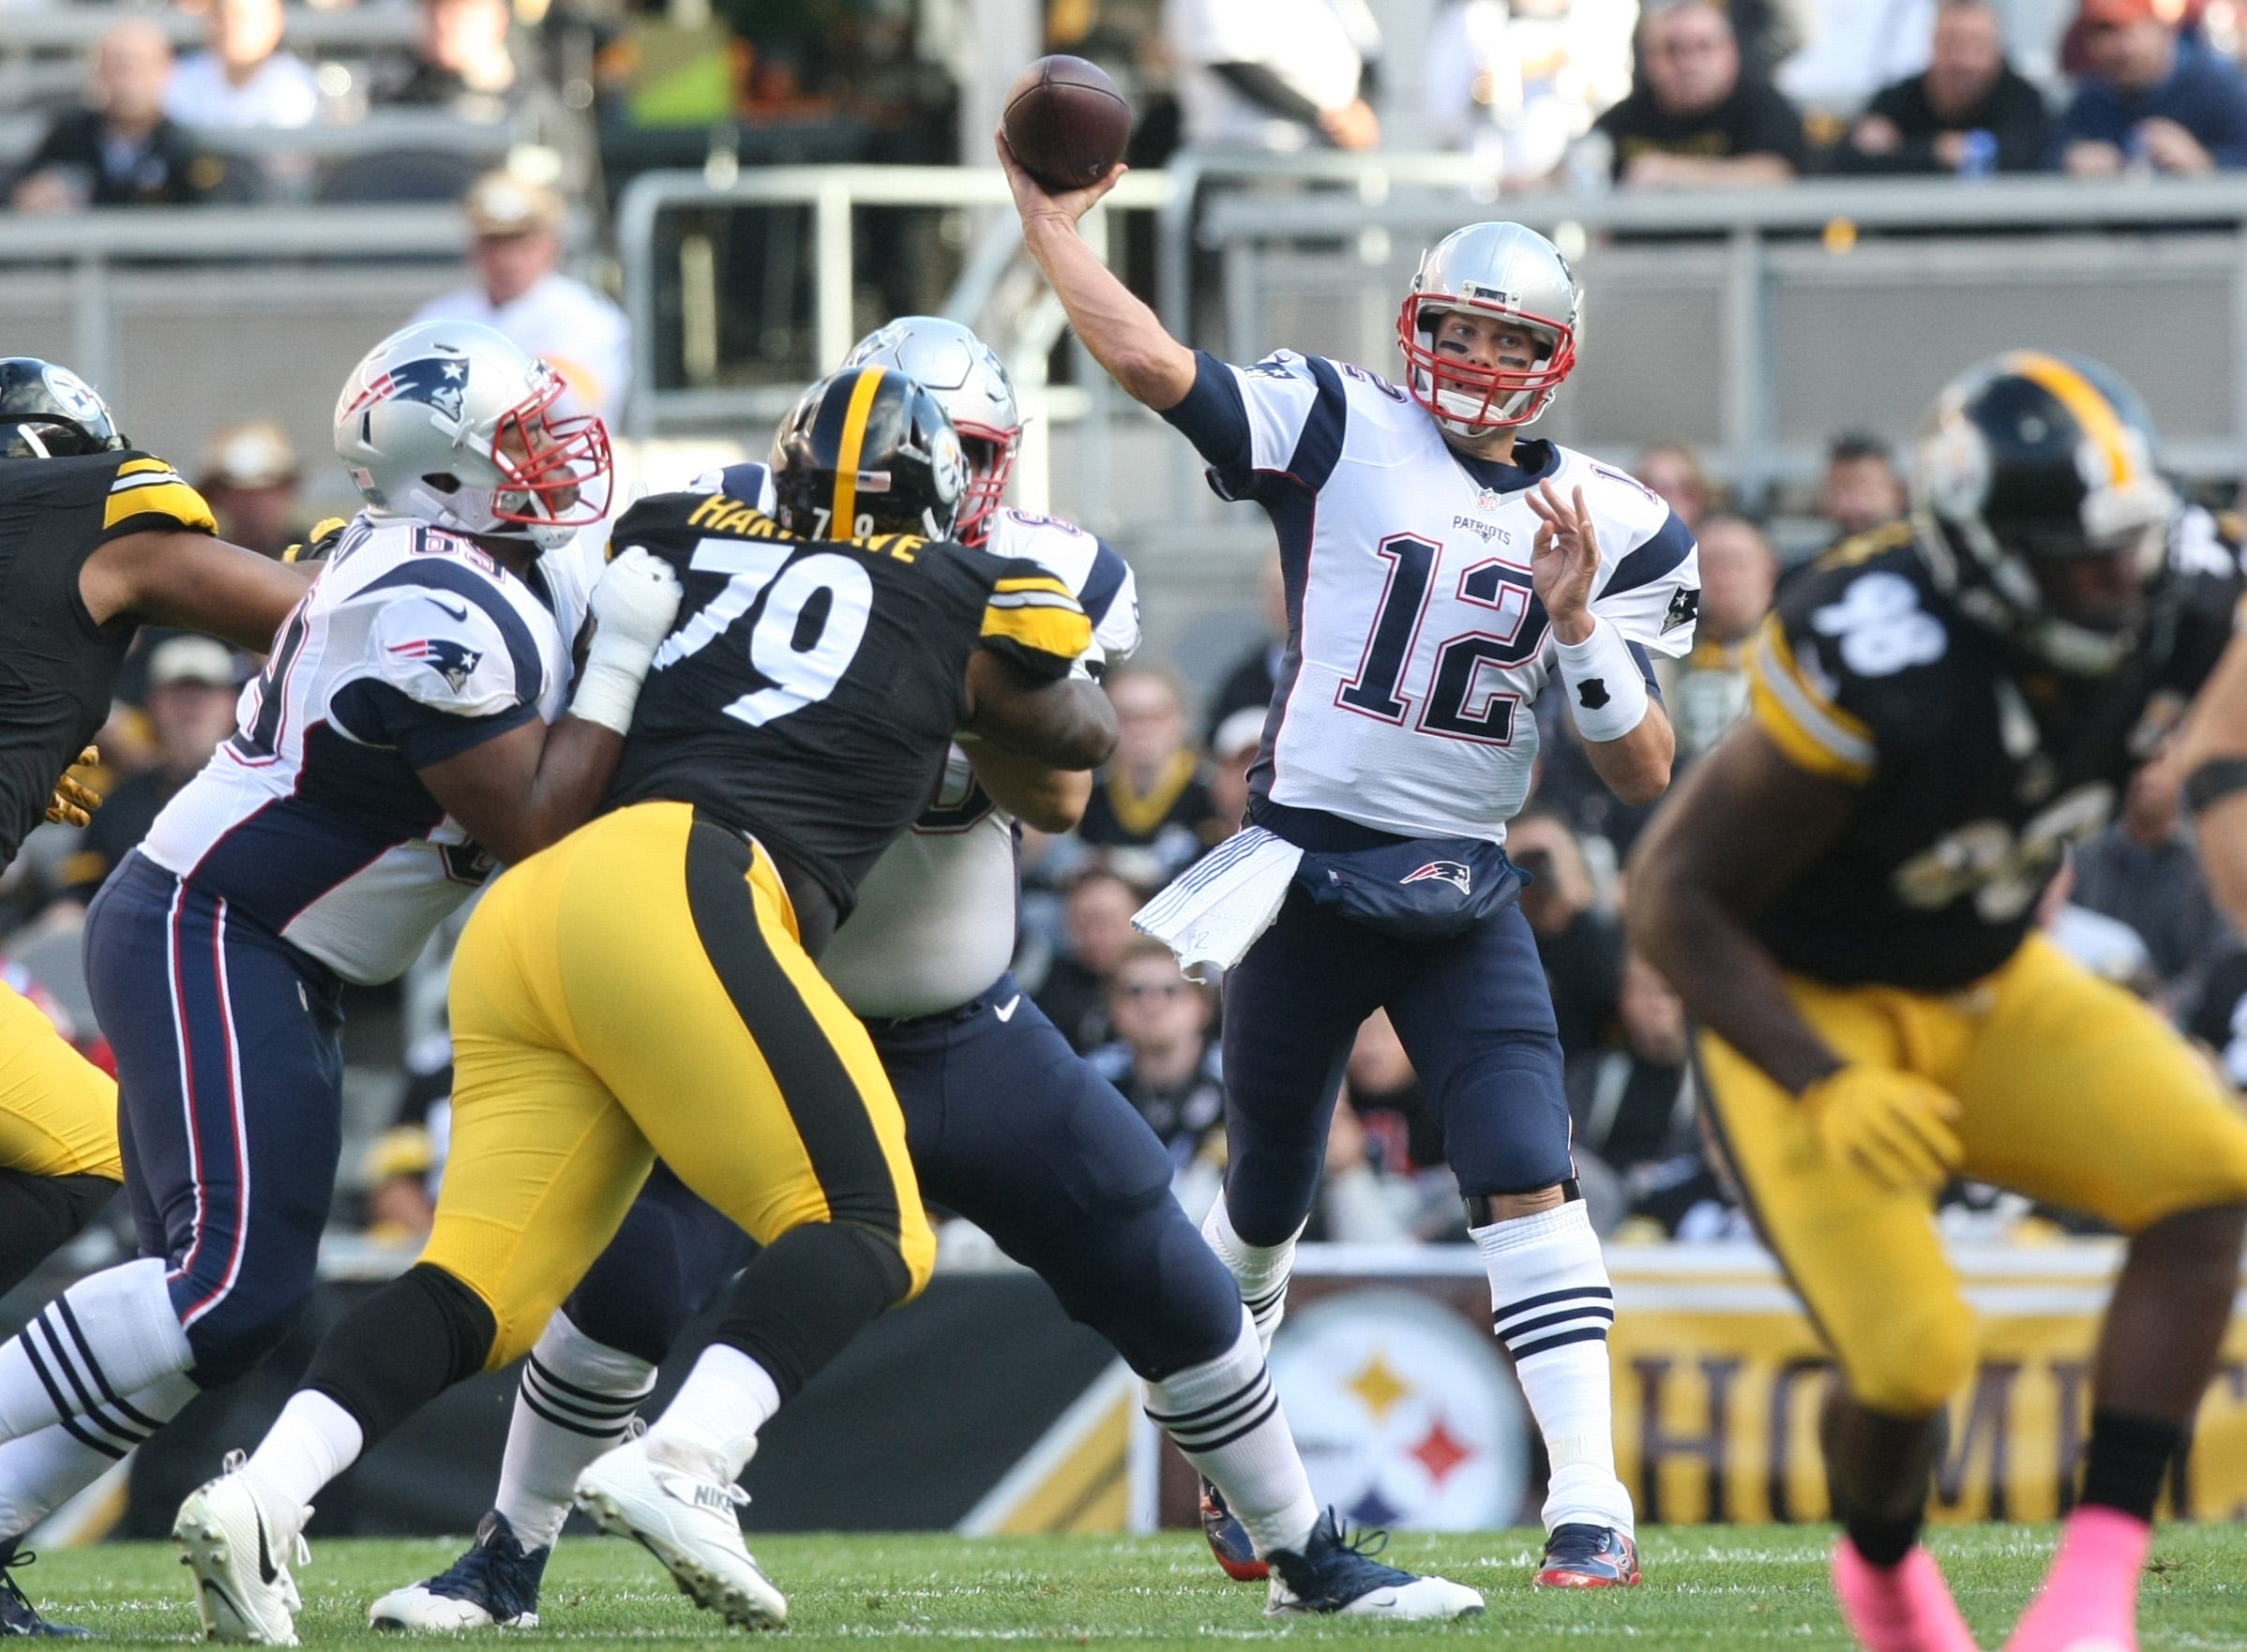 Patriots-Steelers rematch among 10 NFL games we can't wait to see on 2018 schedule